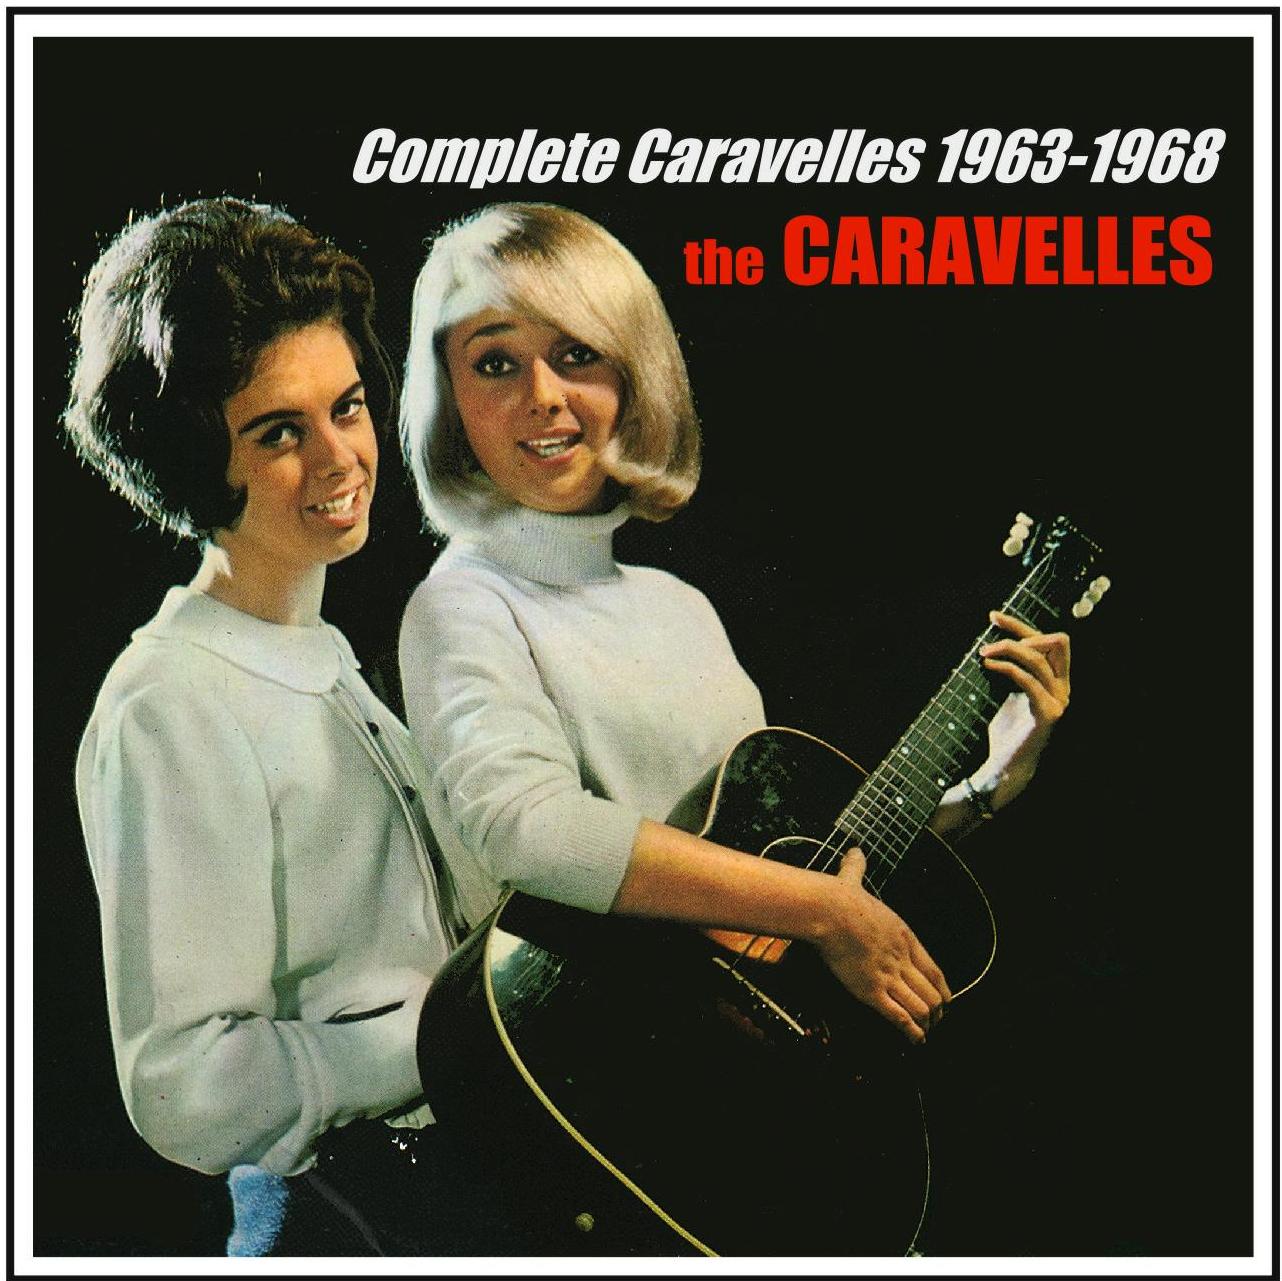 The Caravelles